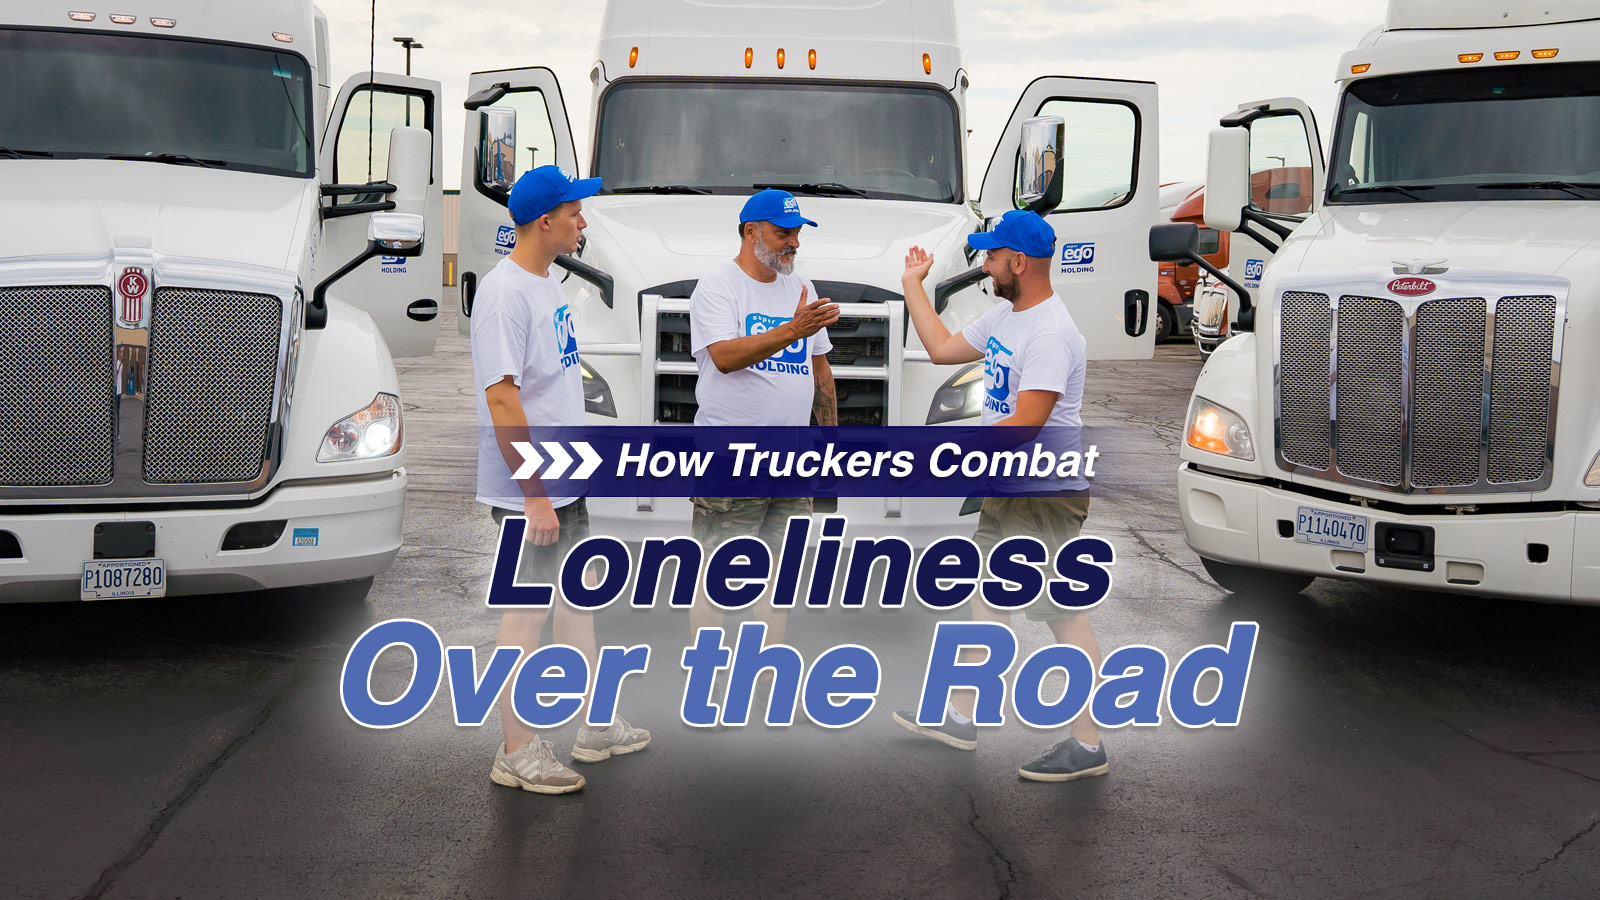 How Truckers Combat Loneliness Over the Road